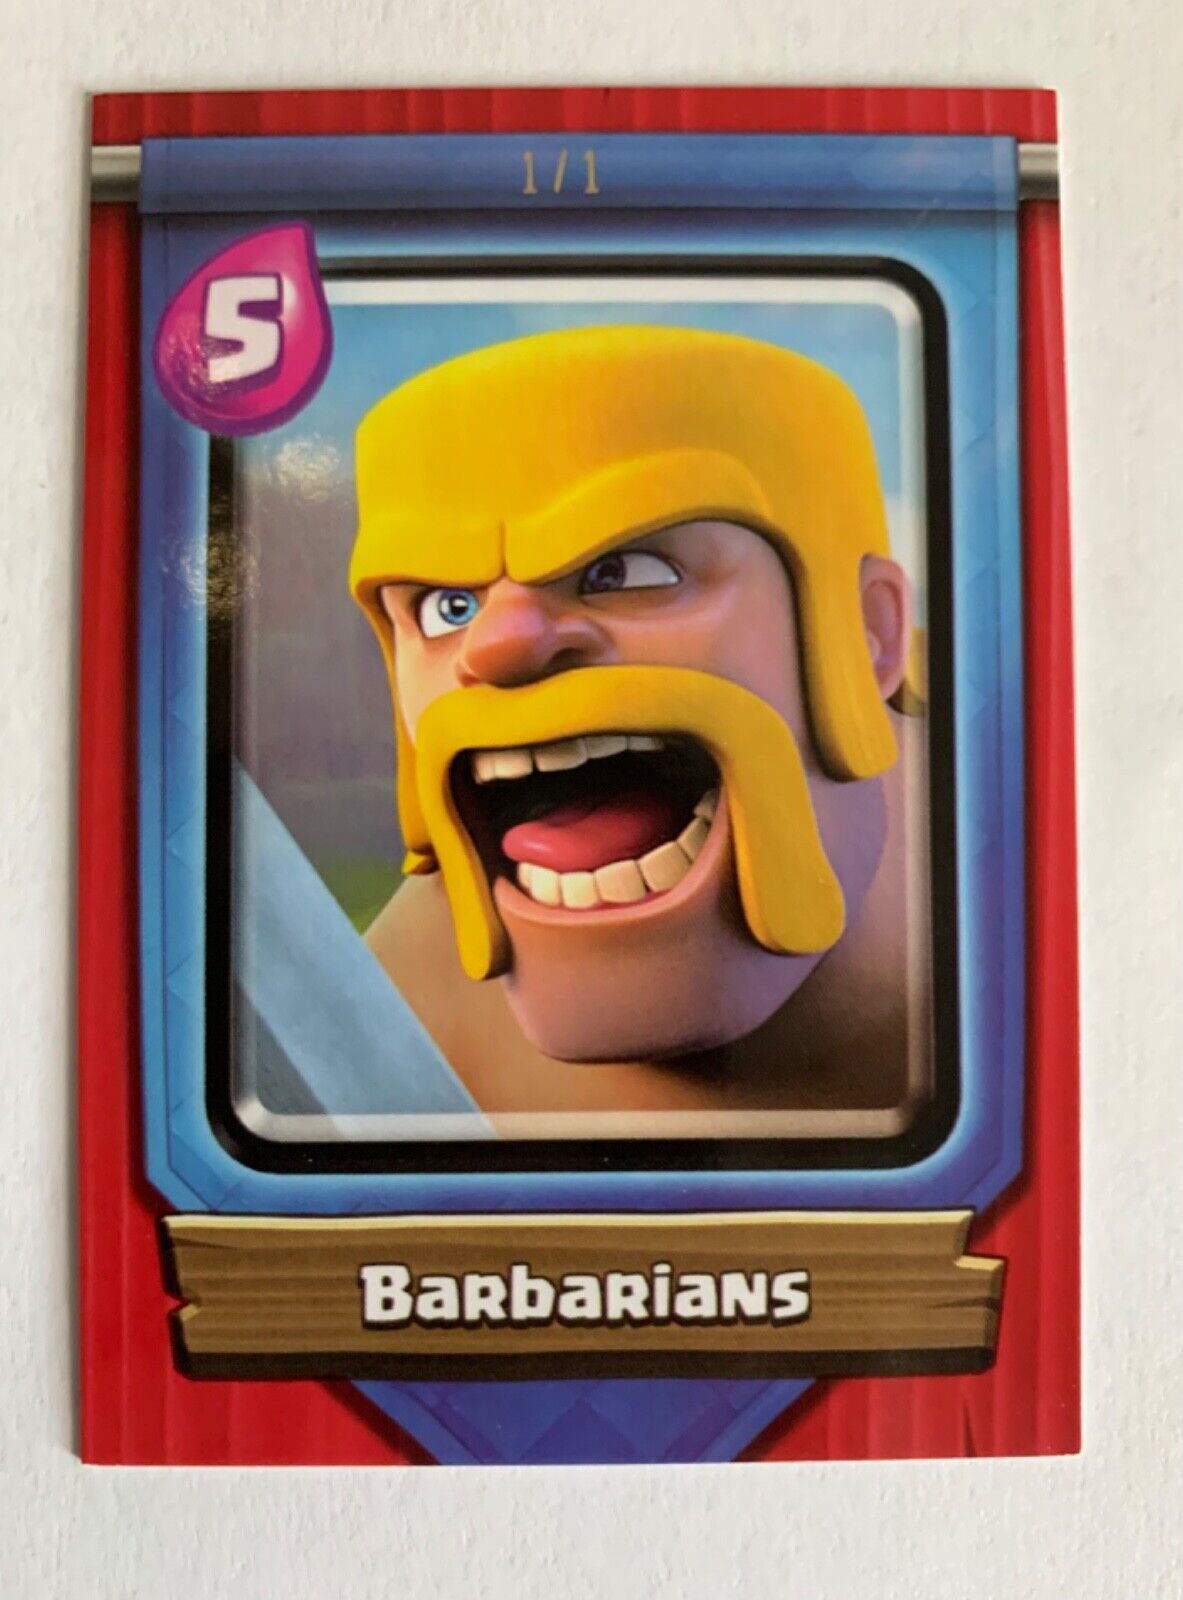 2018 Topps Clash Royale 1/1 Red Border Barbarians SUPER RARE One of a kind Card